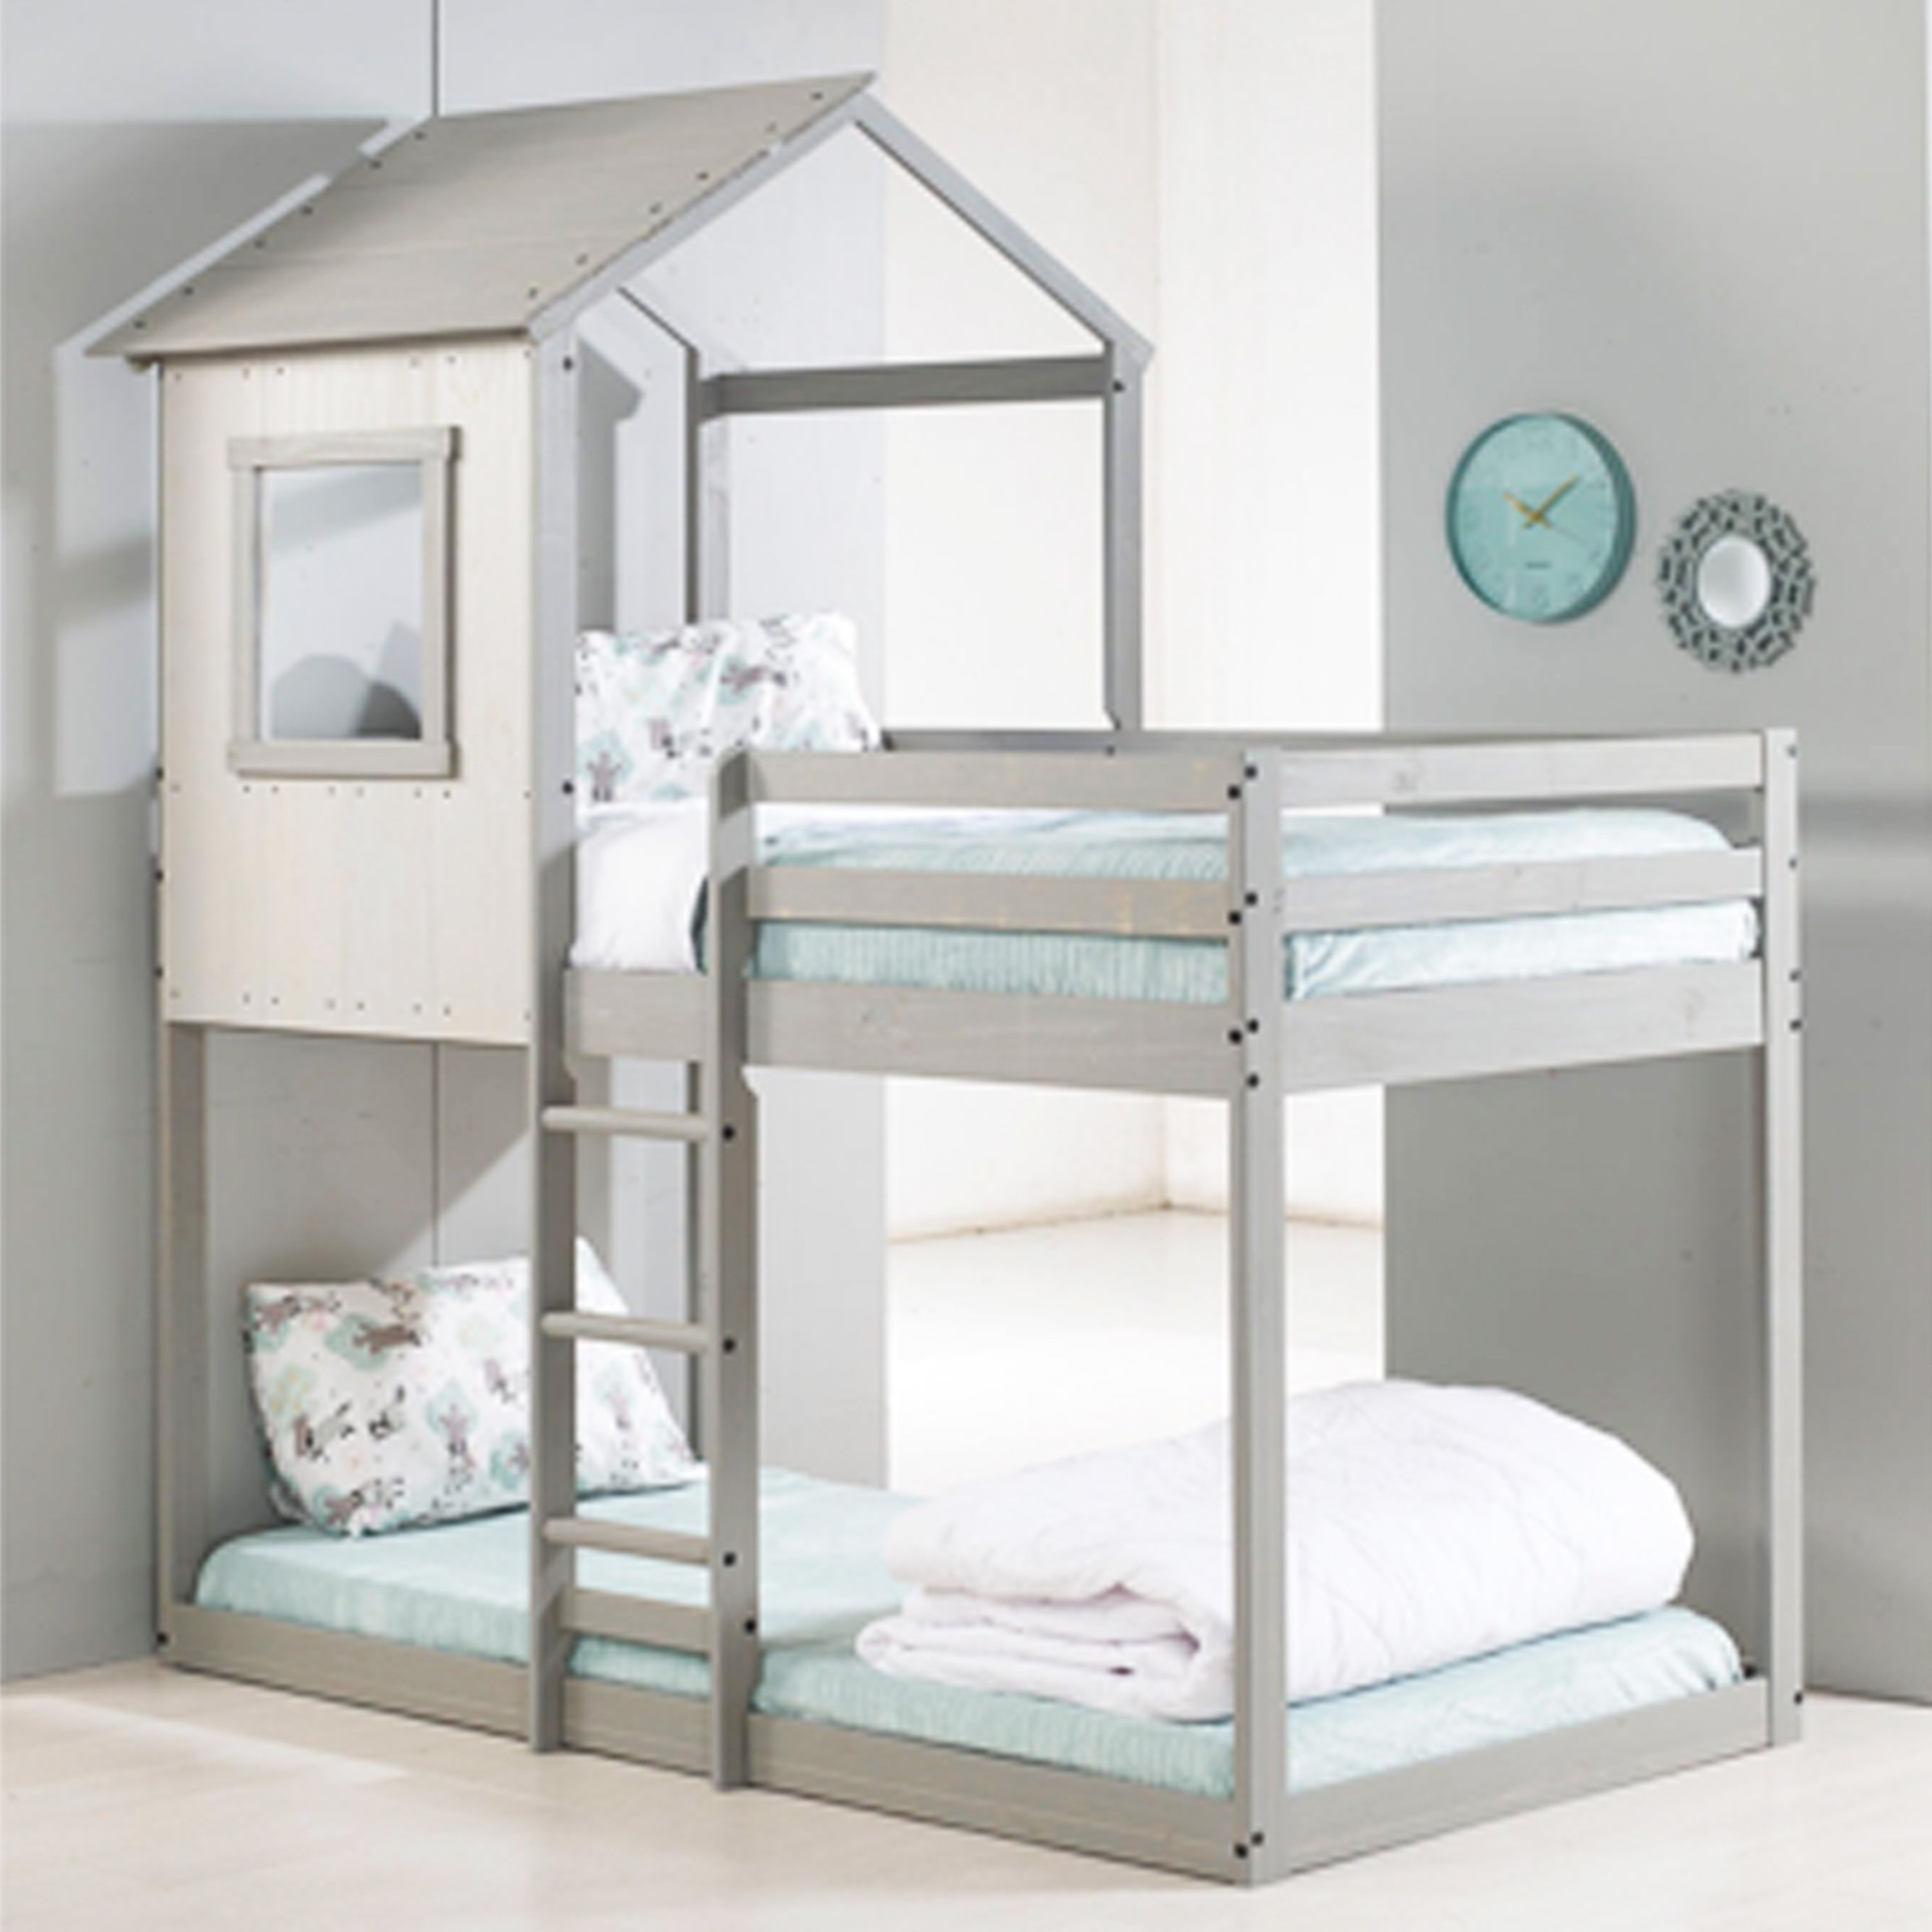 P’kolino Tree Bunk Bed with Rustic White, Light Gray Frame